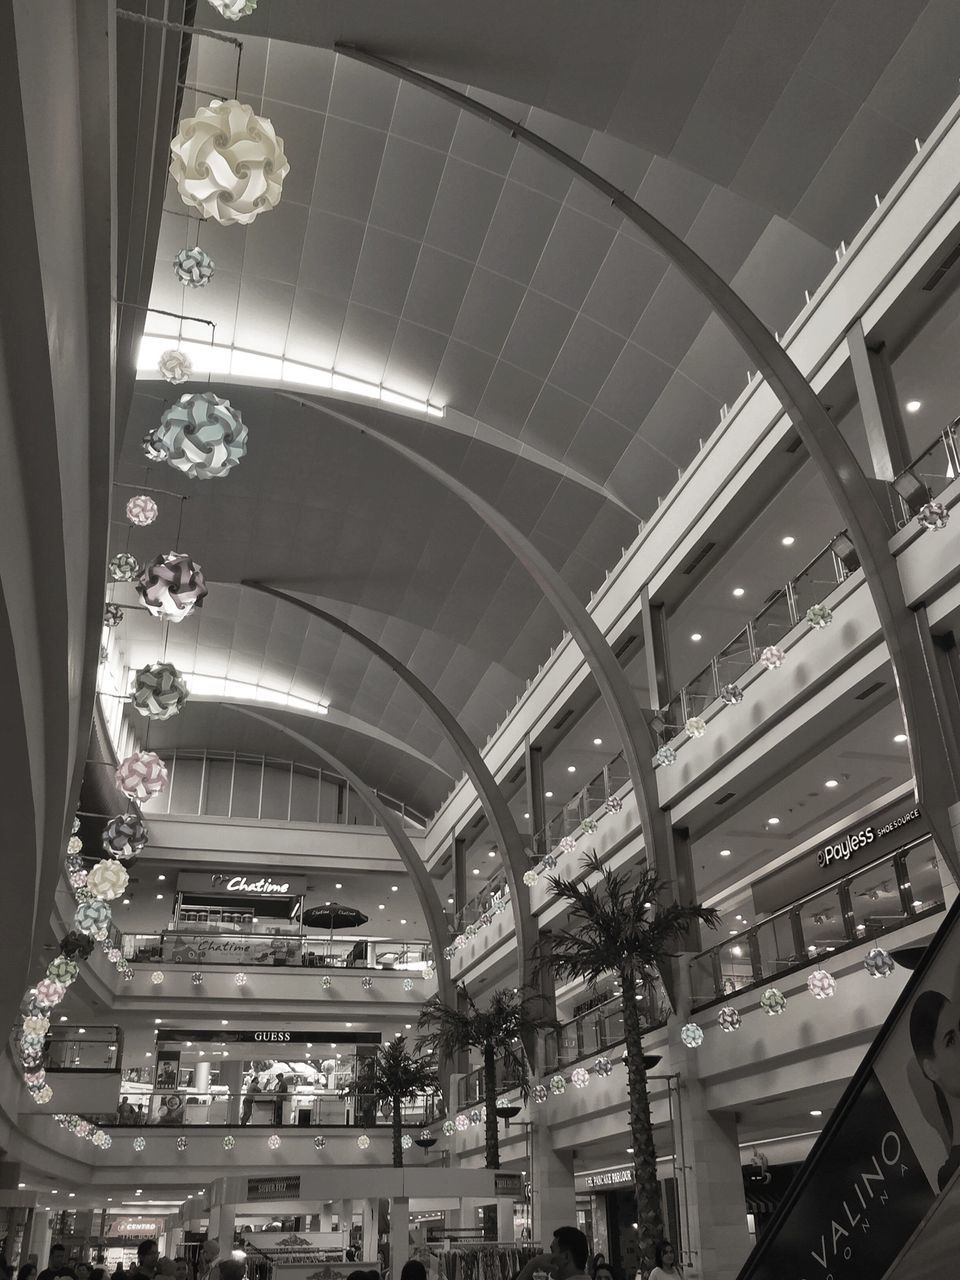 indoors, ceiling, architecture, built structure, illuminated, low angle view, shopping mall, incidental people, interior, lighting equipment, arch, modern, travel, transportation, large group of people, in a row, architectural column, railroad station, architectural feature, high angle view